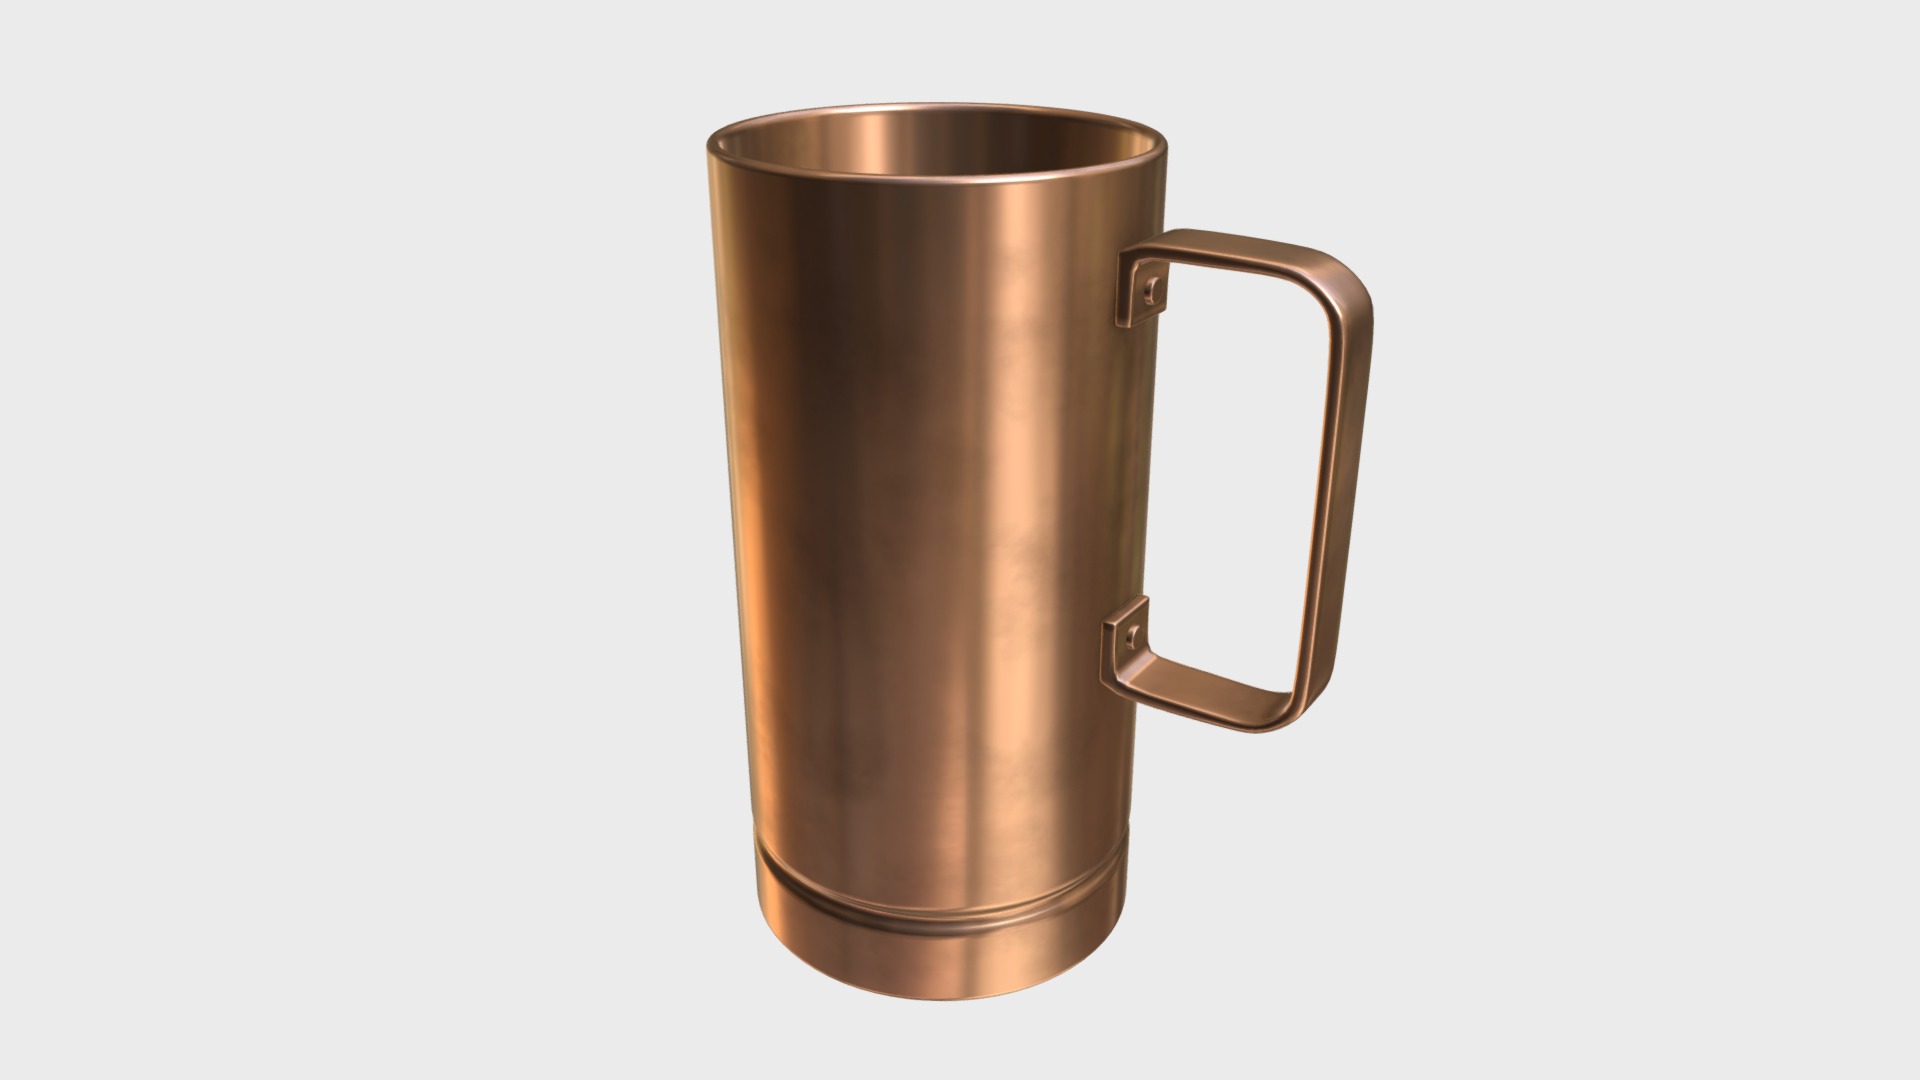 3D model Pure copper tall mug - This is a 3D model of the Pure copper tall mug. The 3D model is about a metal canister with a handle.